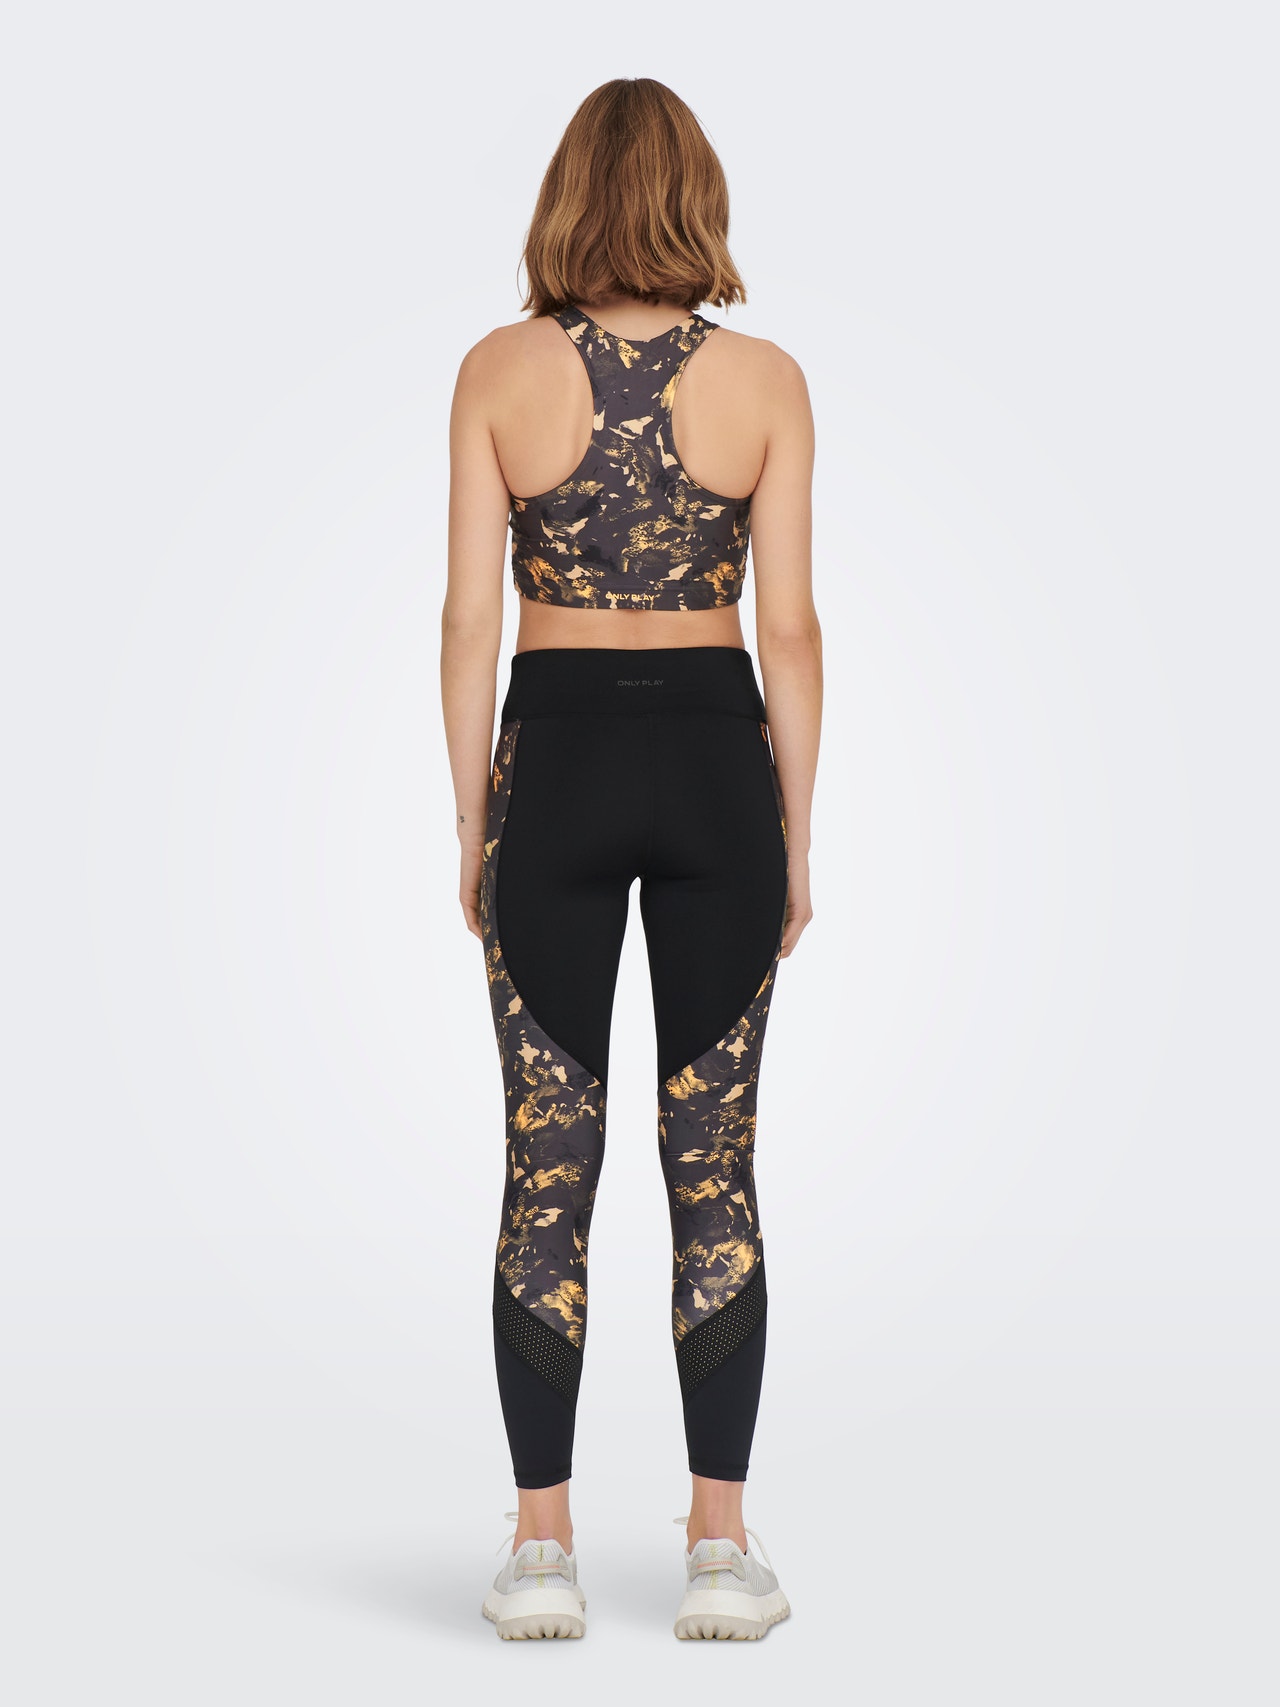 Nike gold and Black floral performance leggings